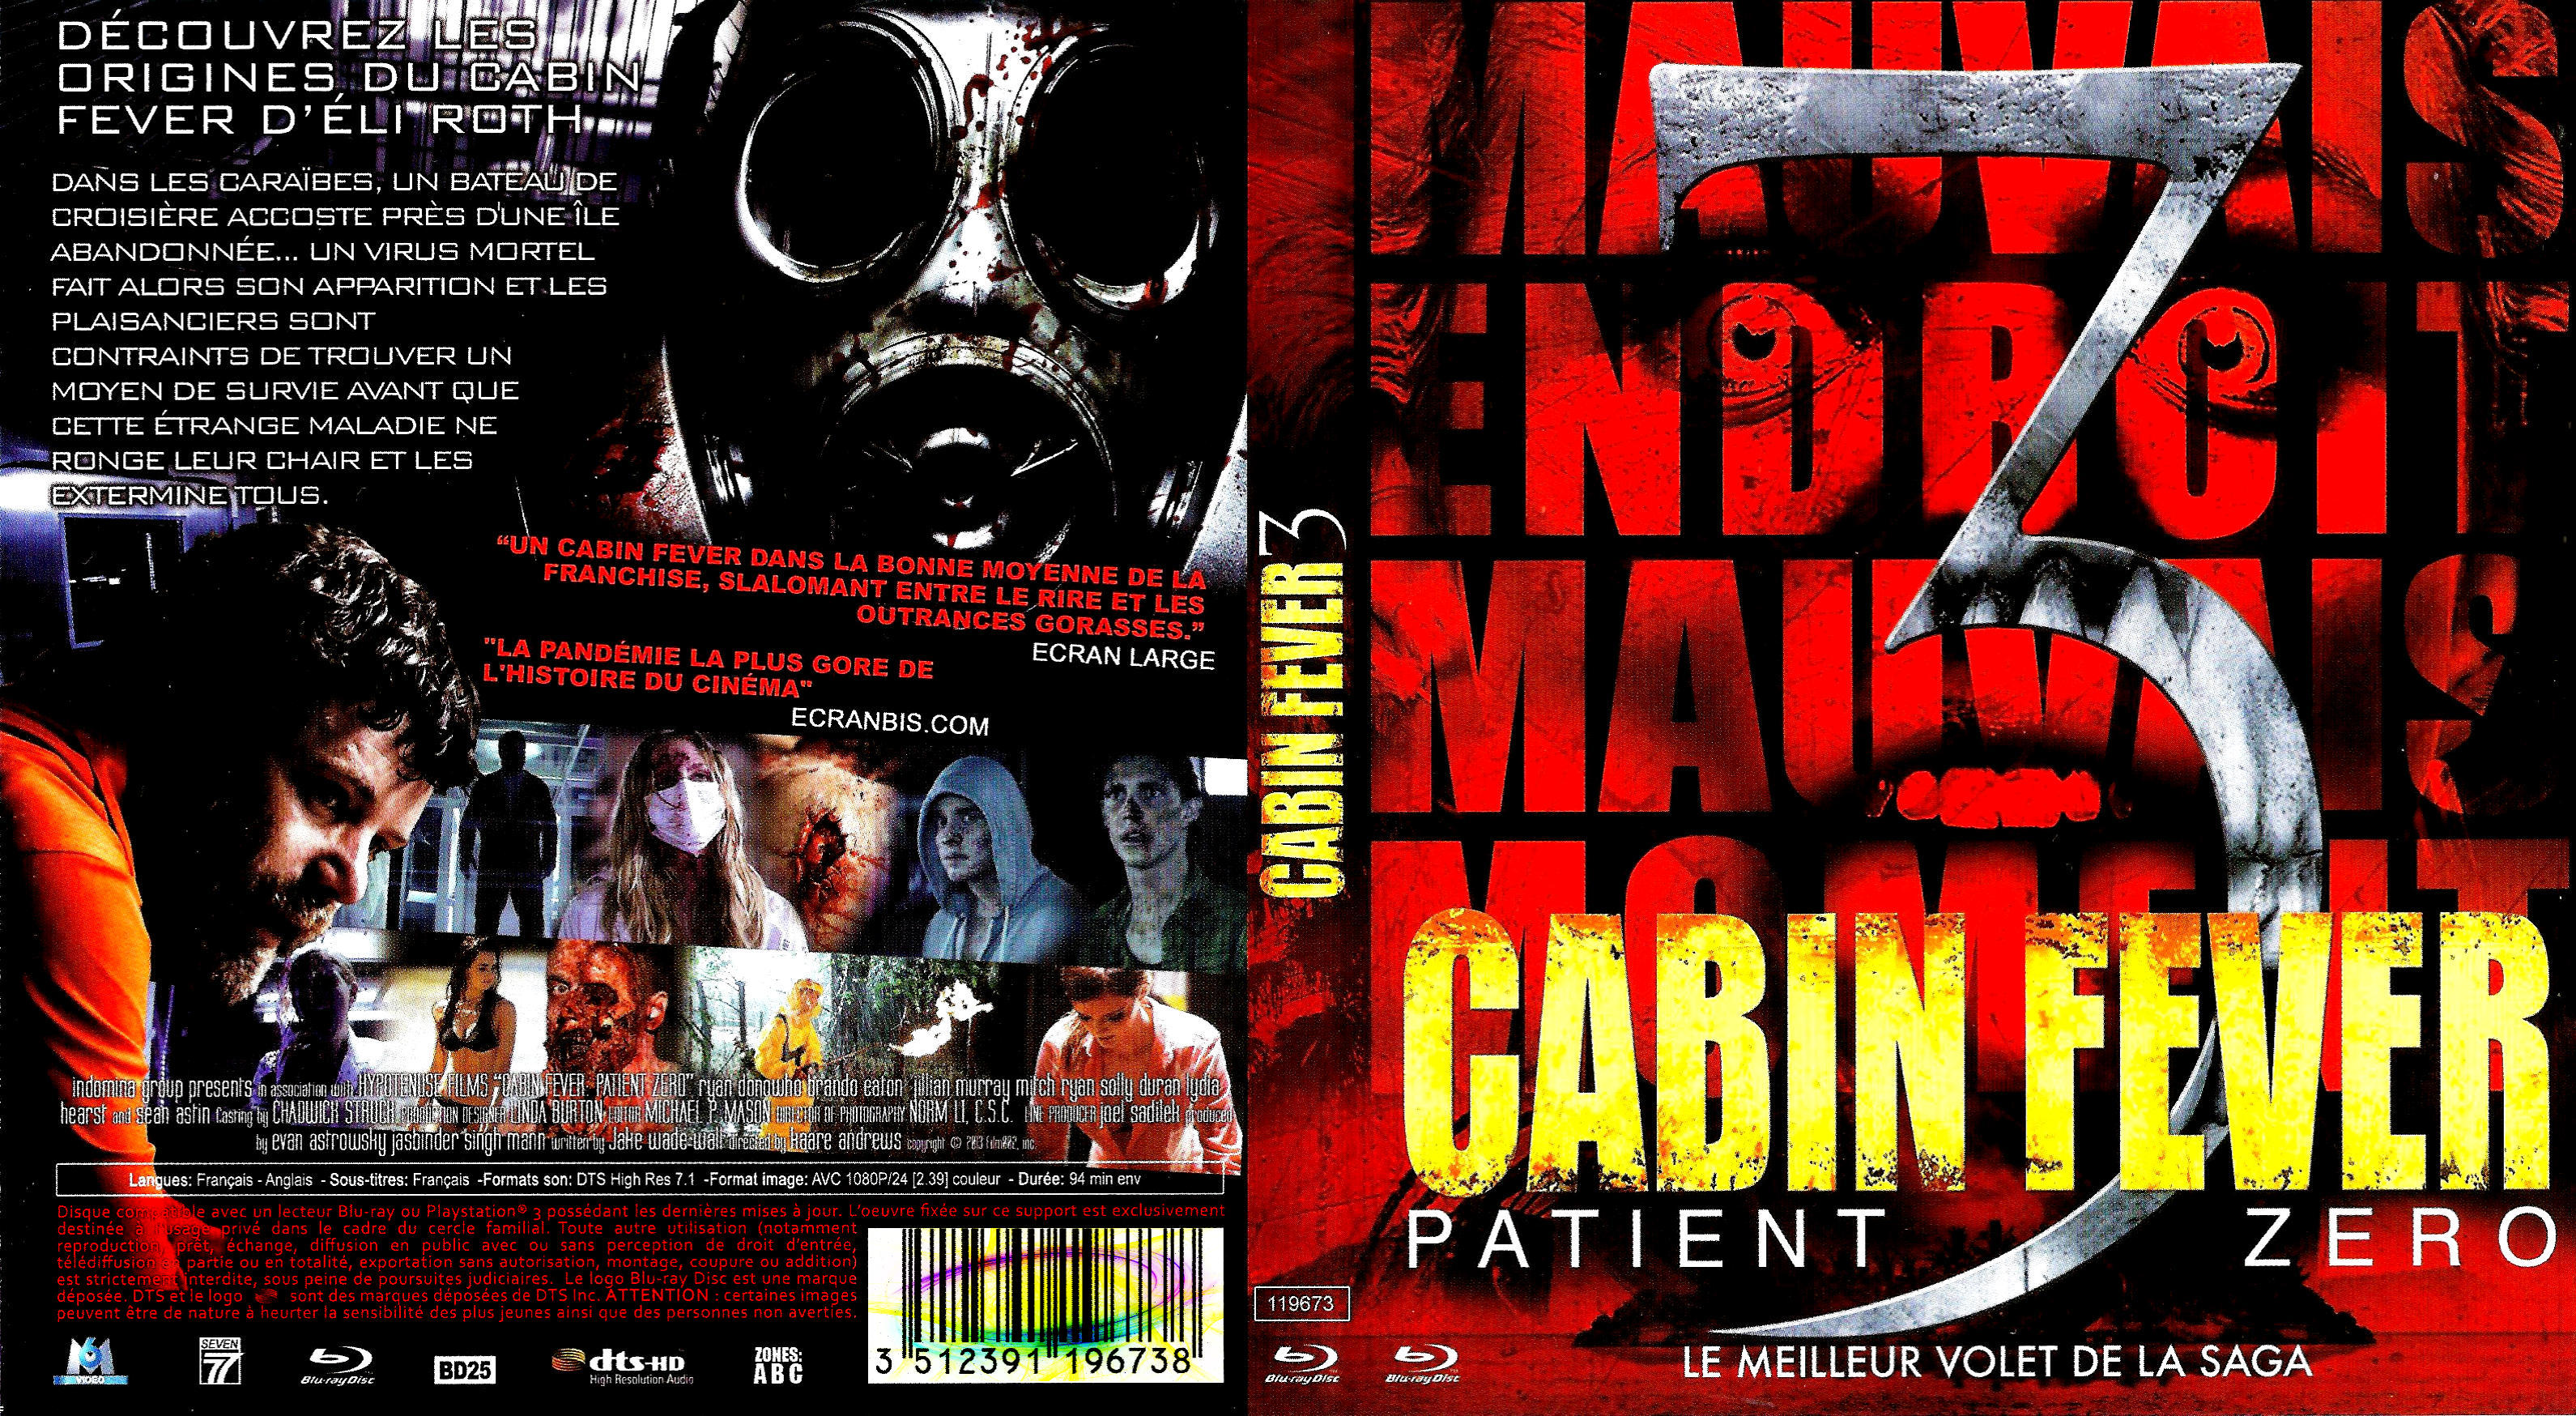 Jaquette DVD Cabin fever 3 patient zro (BLU-RAY)